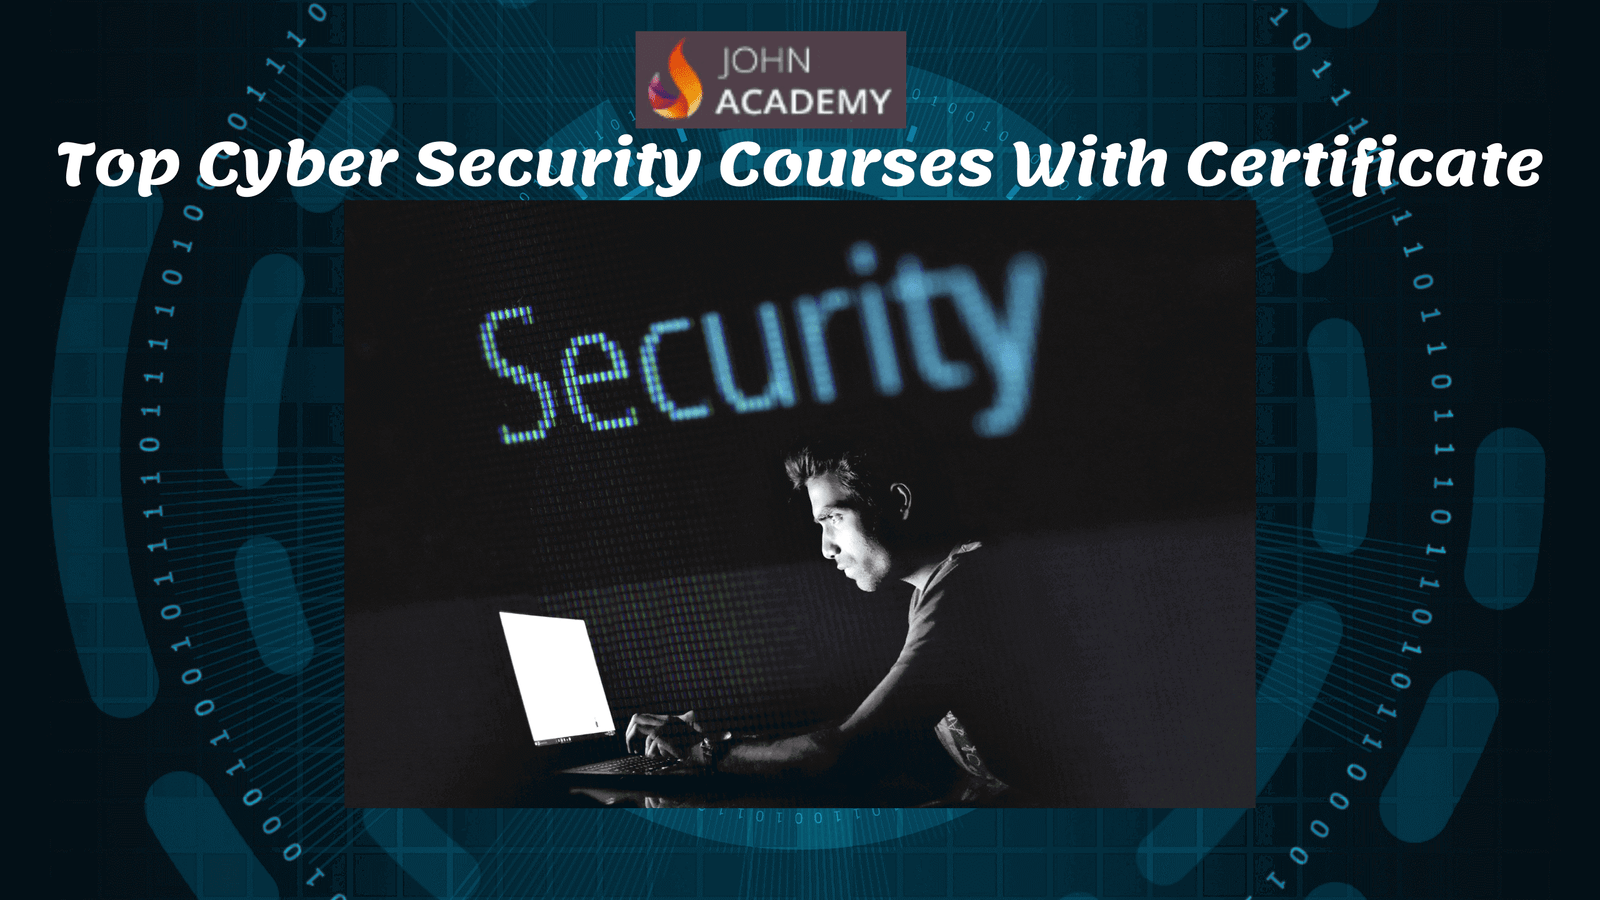 Top 24 Cyber Security Courses With Certificate